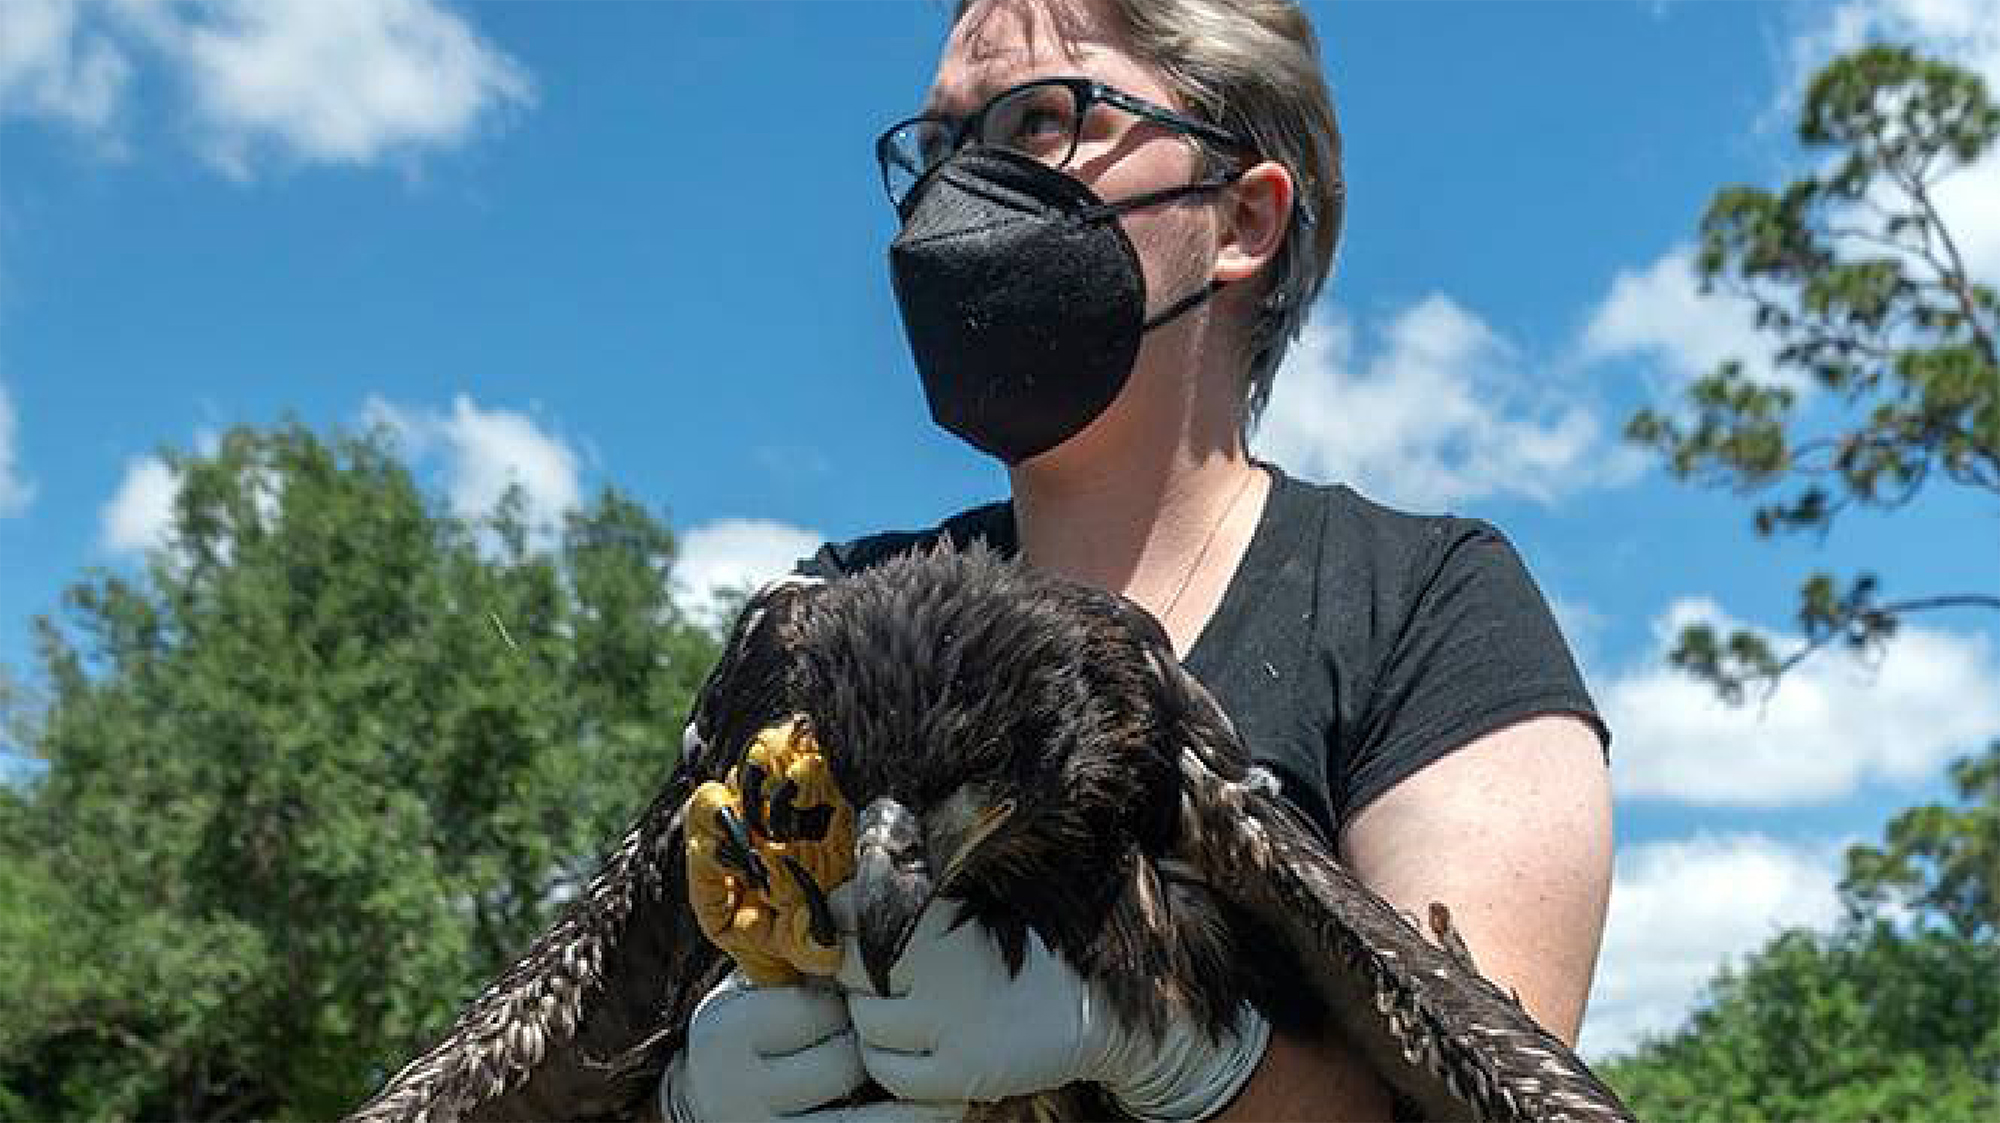 Eagle on its way to be released